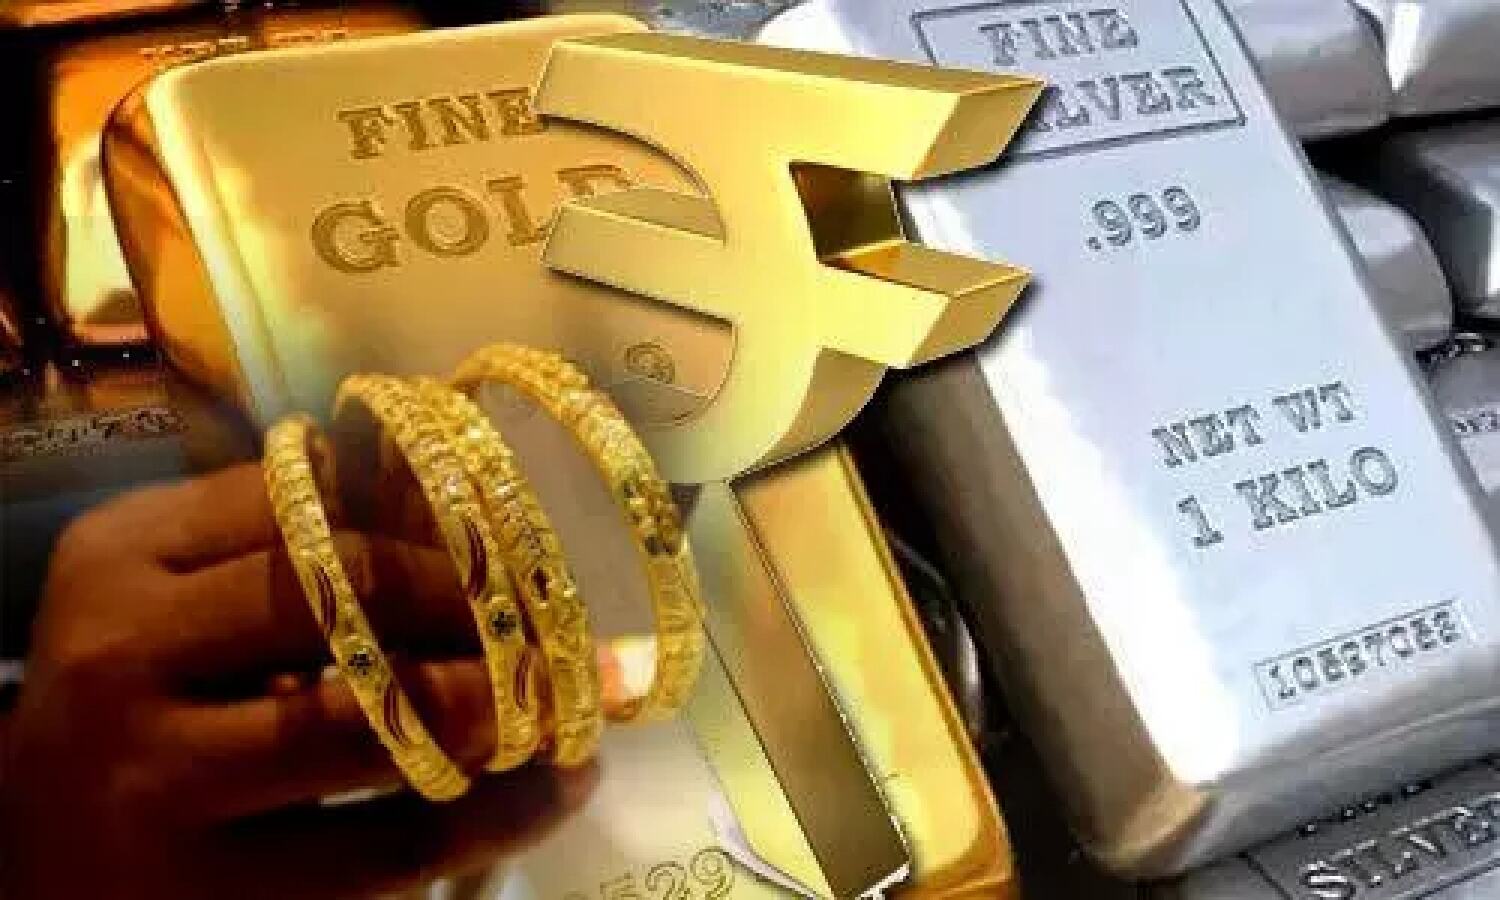 Gold Silver Price Today: Gold becomes expensive, silver prices stable, know the price in your city